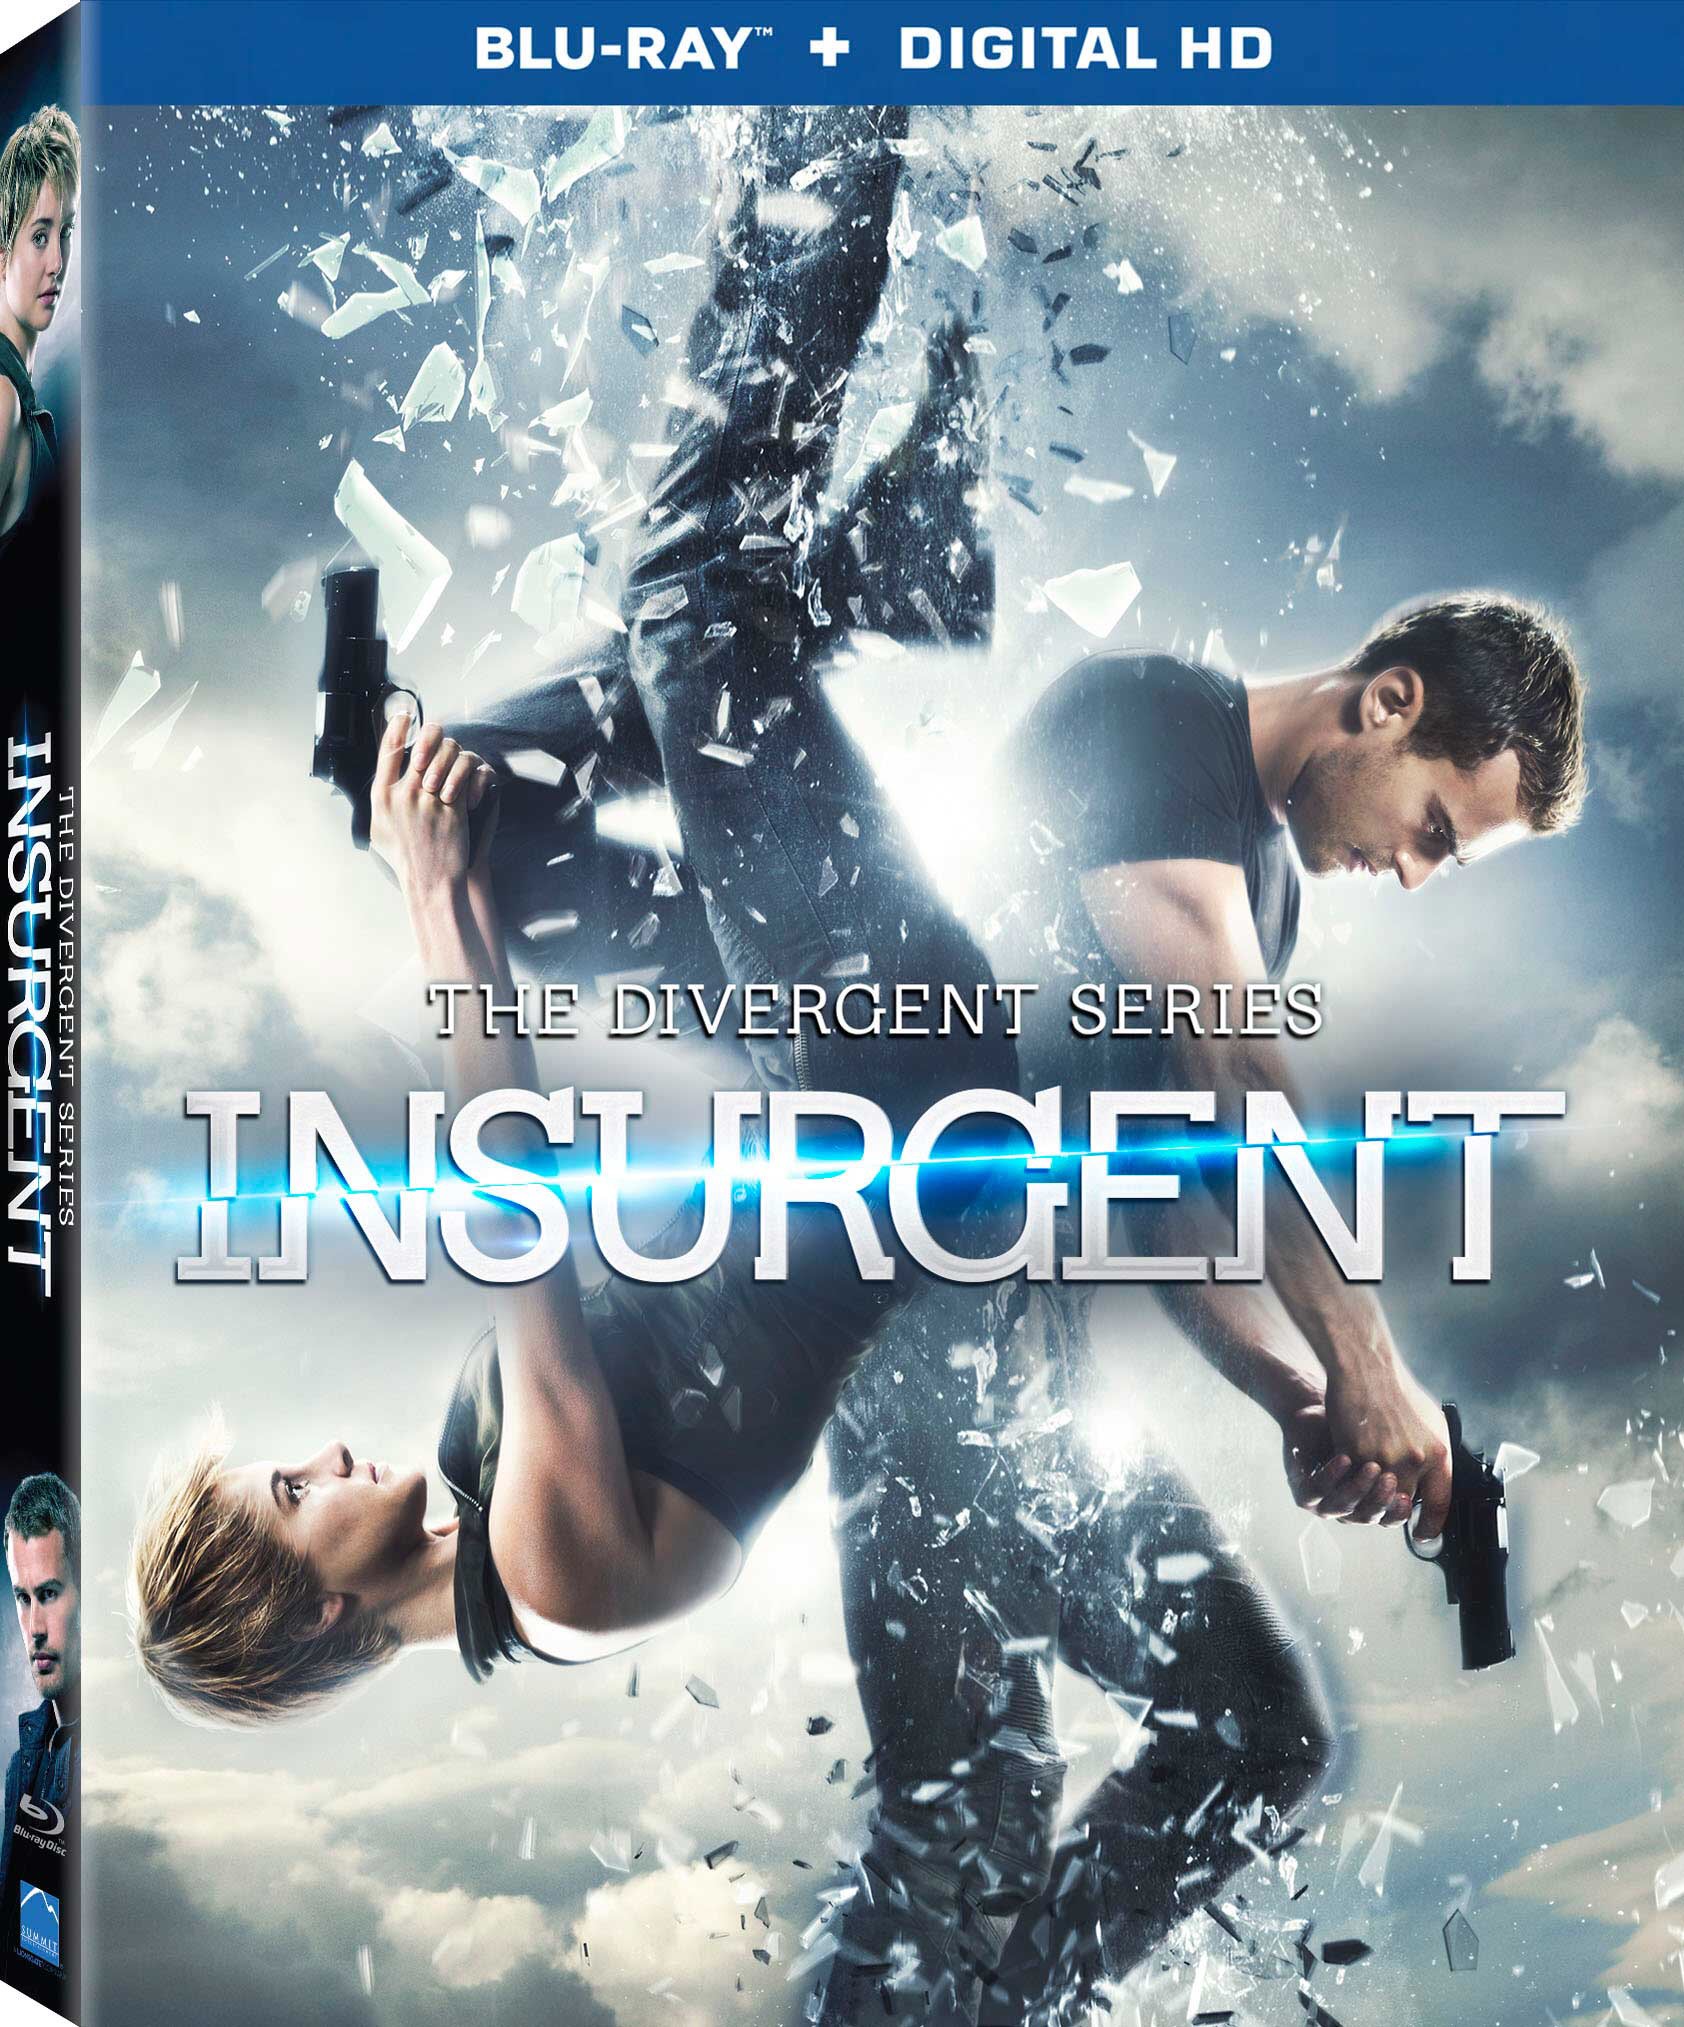 Insurgent Available On Digital HD July 21st. DVD/3D Blu-Ray/Blu-Ray & On Demand August 4th